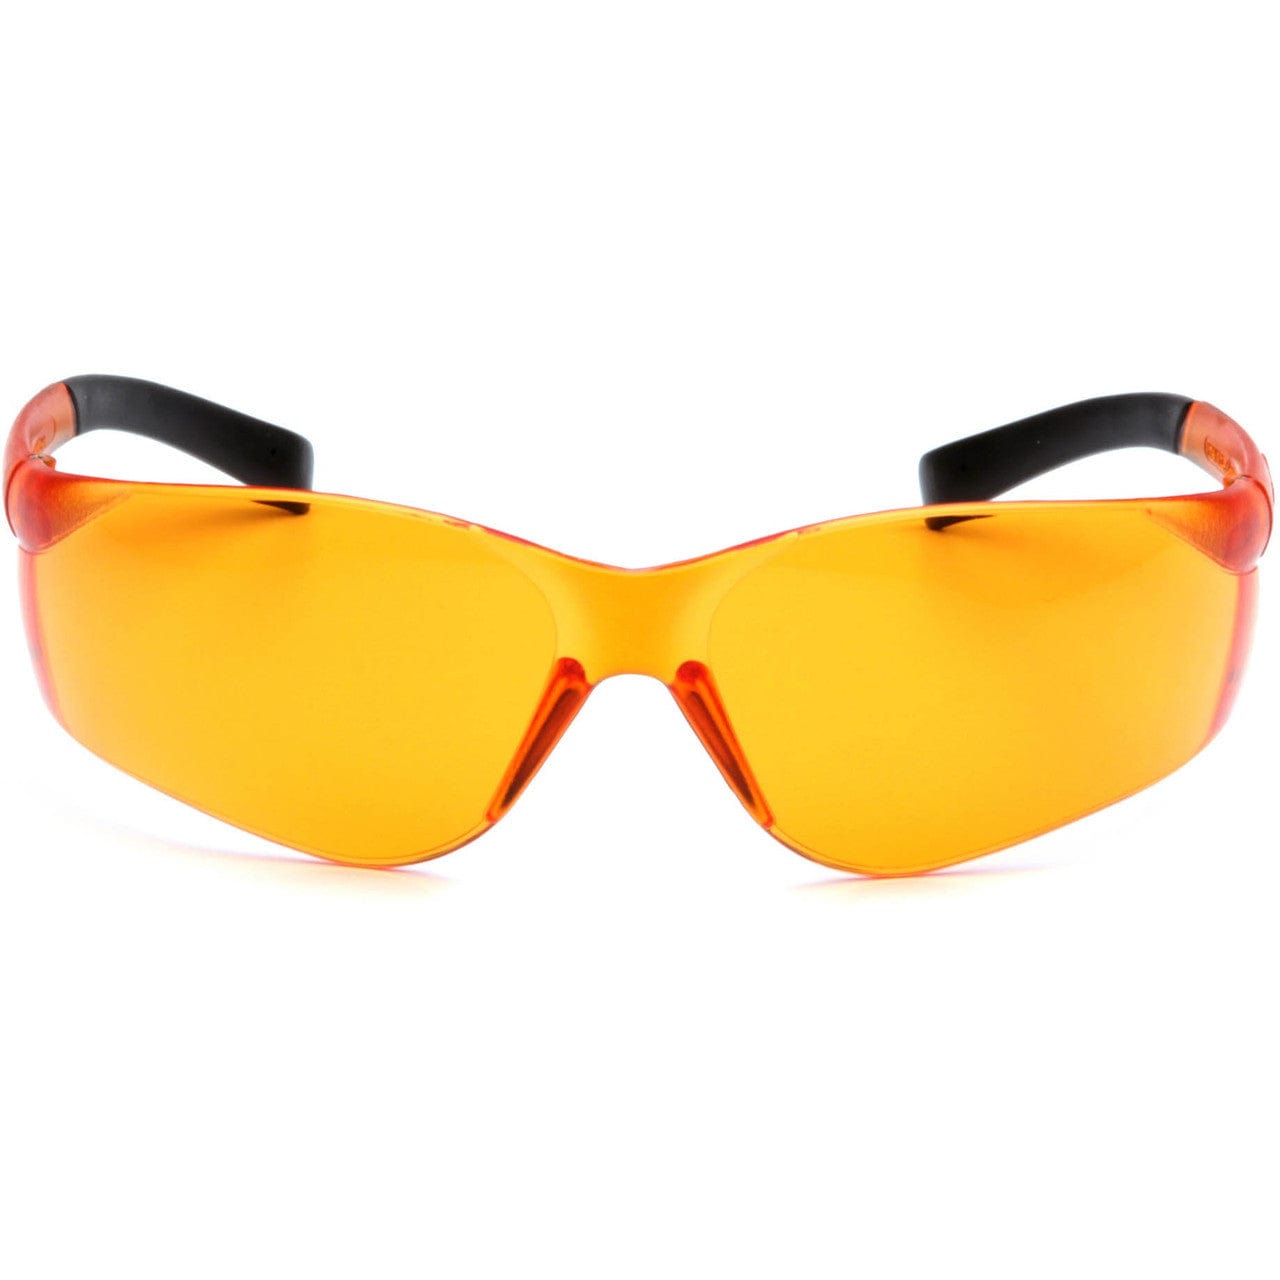 Pyramex Ztek Safety Glasses with Orange Lens S2540S Front View